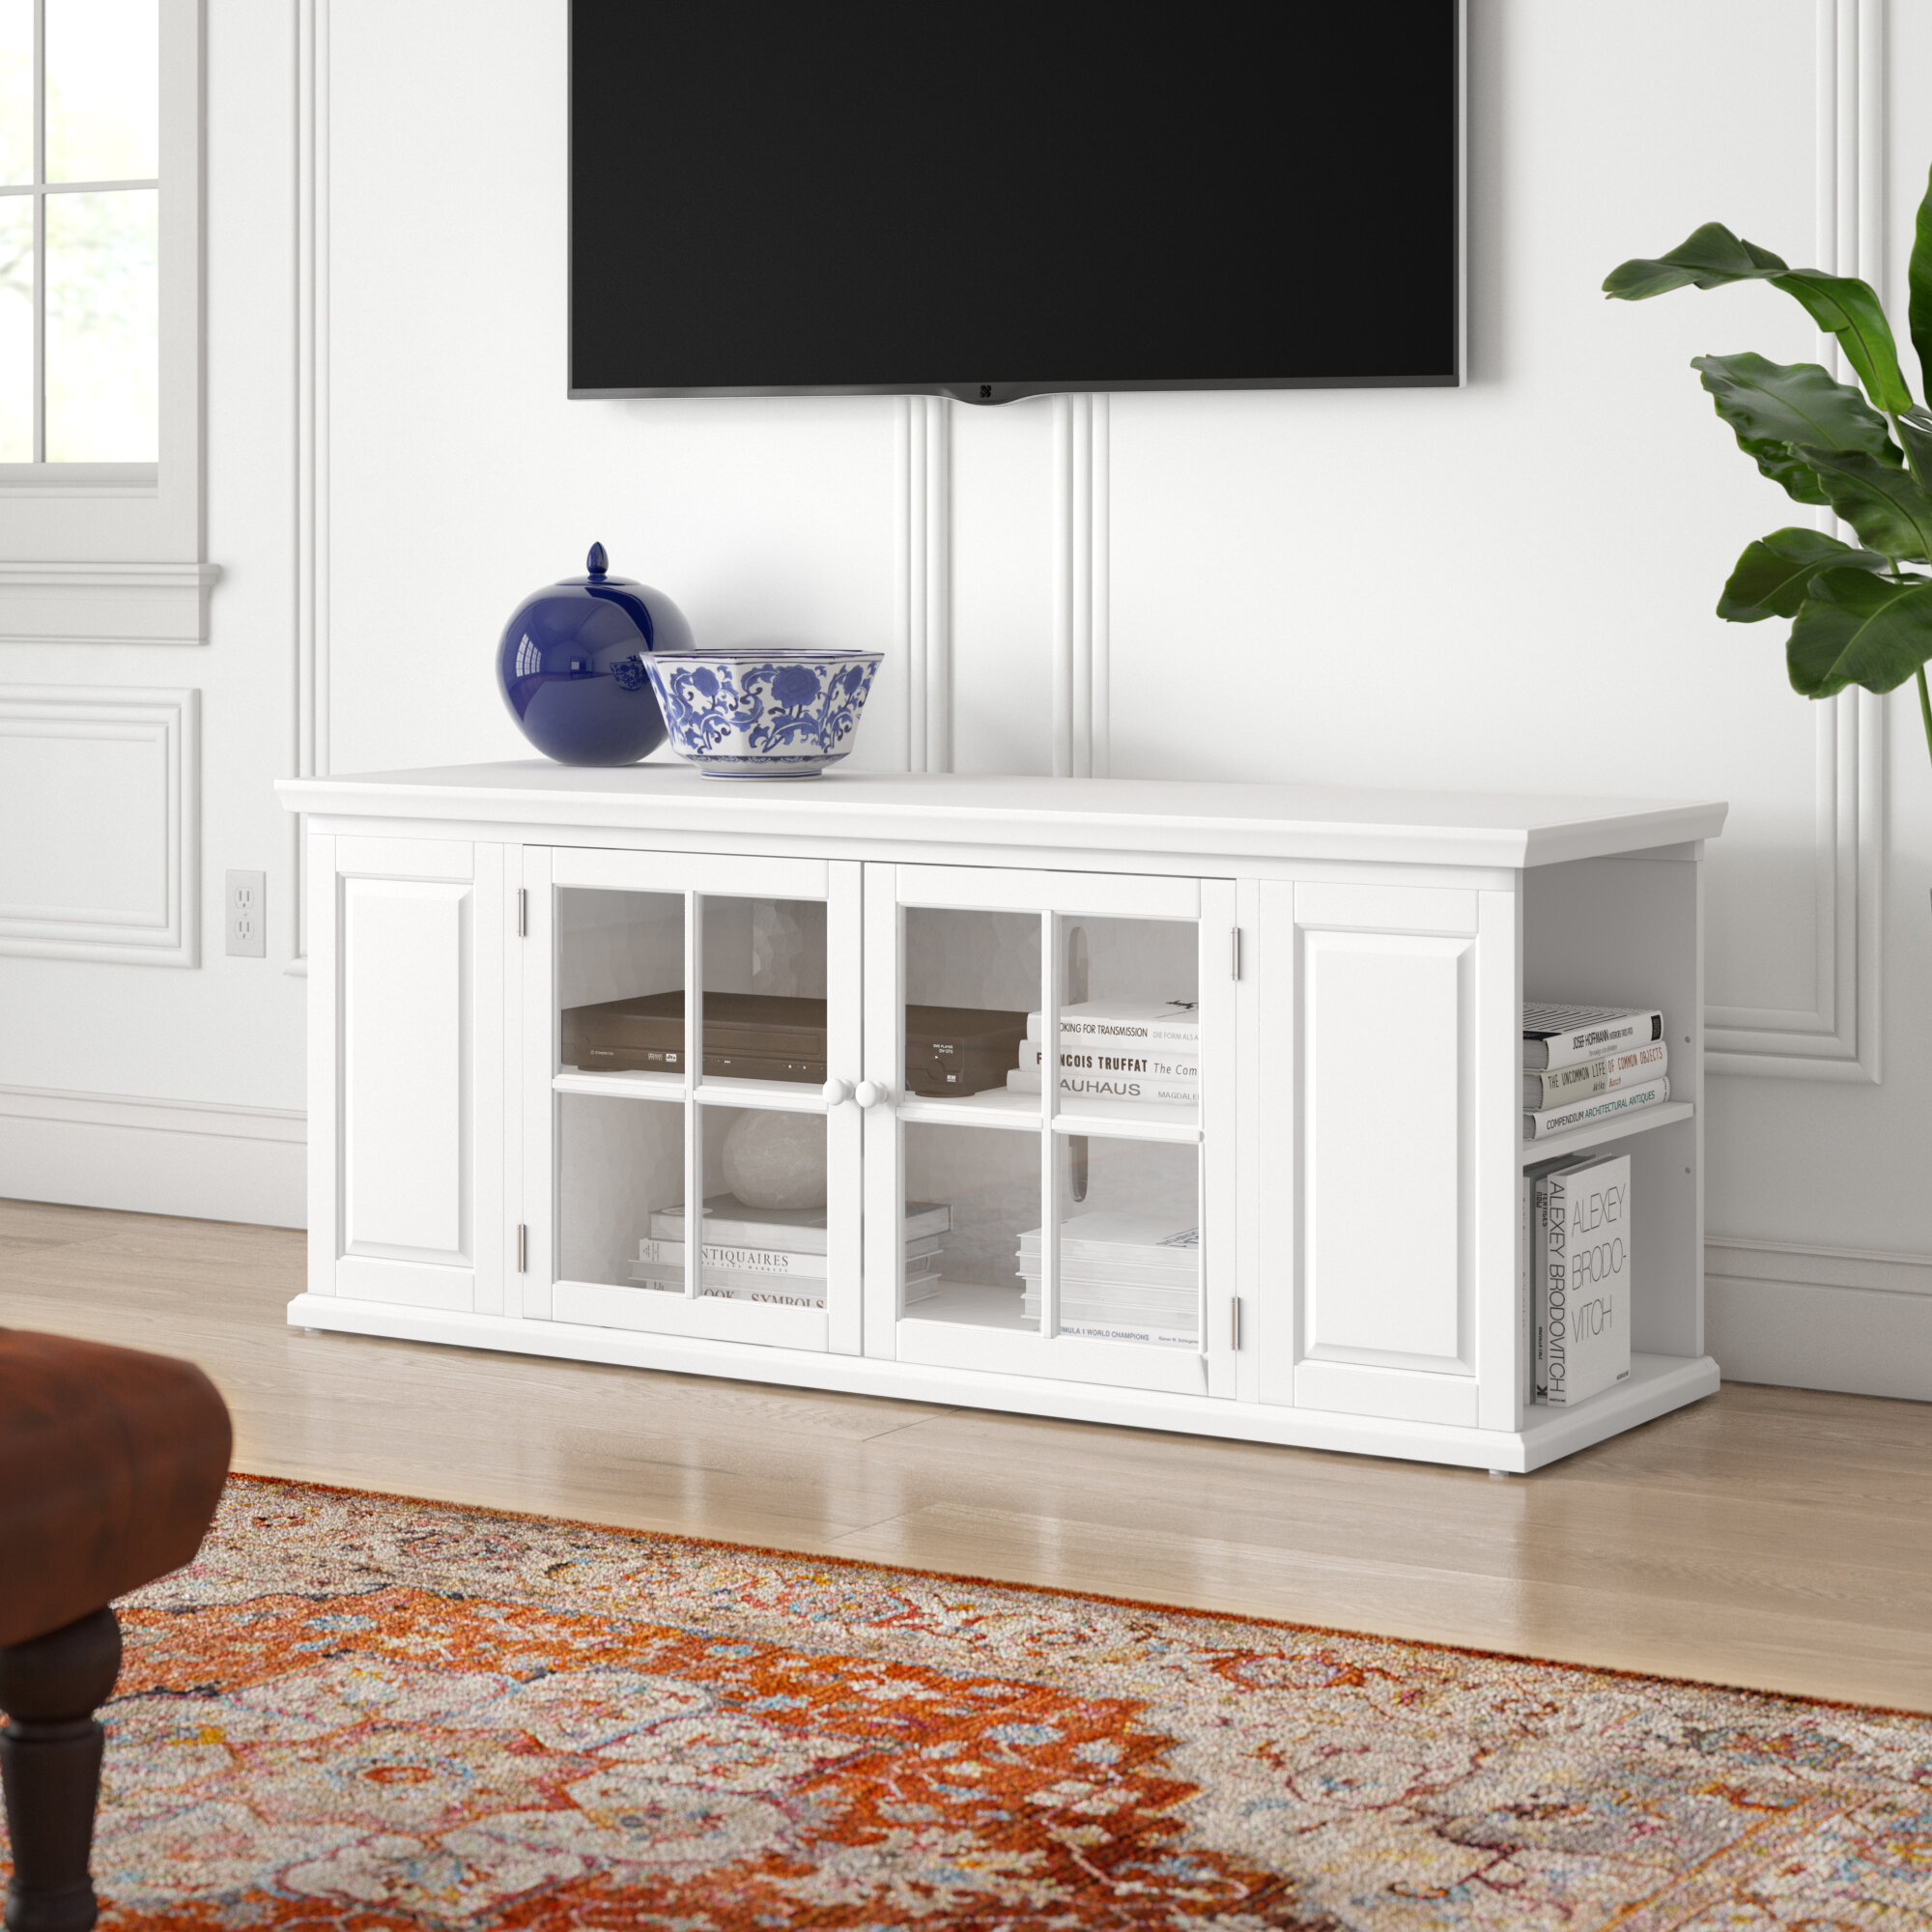 Charlton Home Glenfield Tv Stand For Tvs Up To 75 Reviews Wayfair